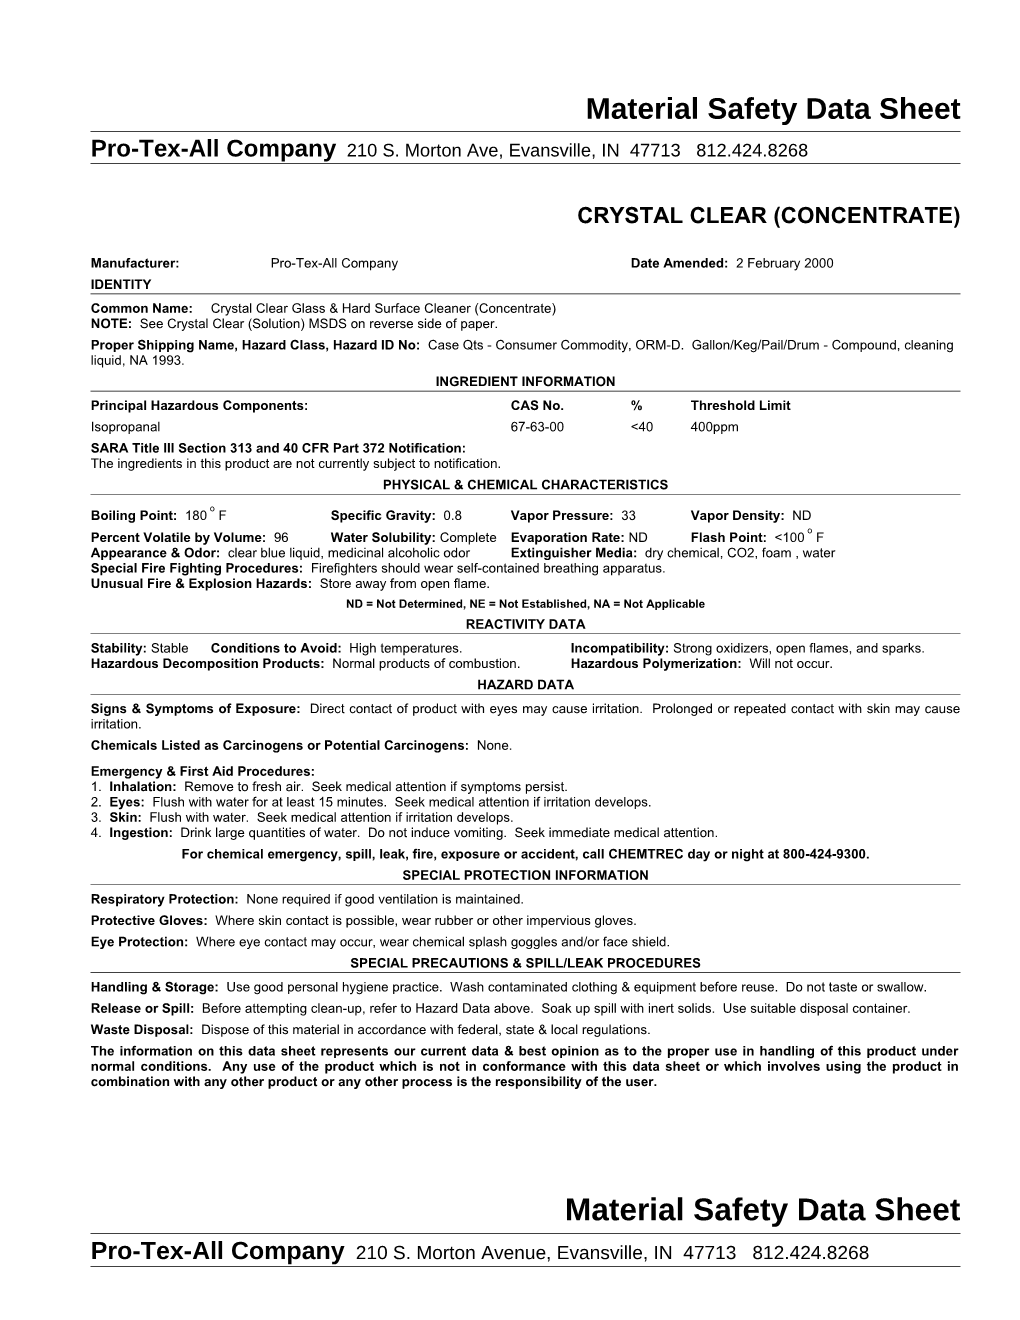 Material Safety Data Sheet s57